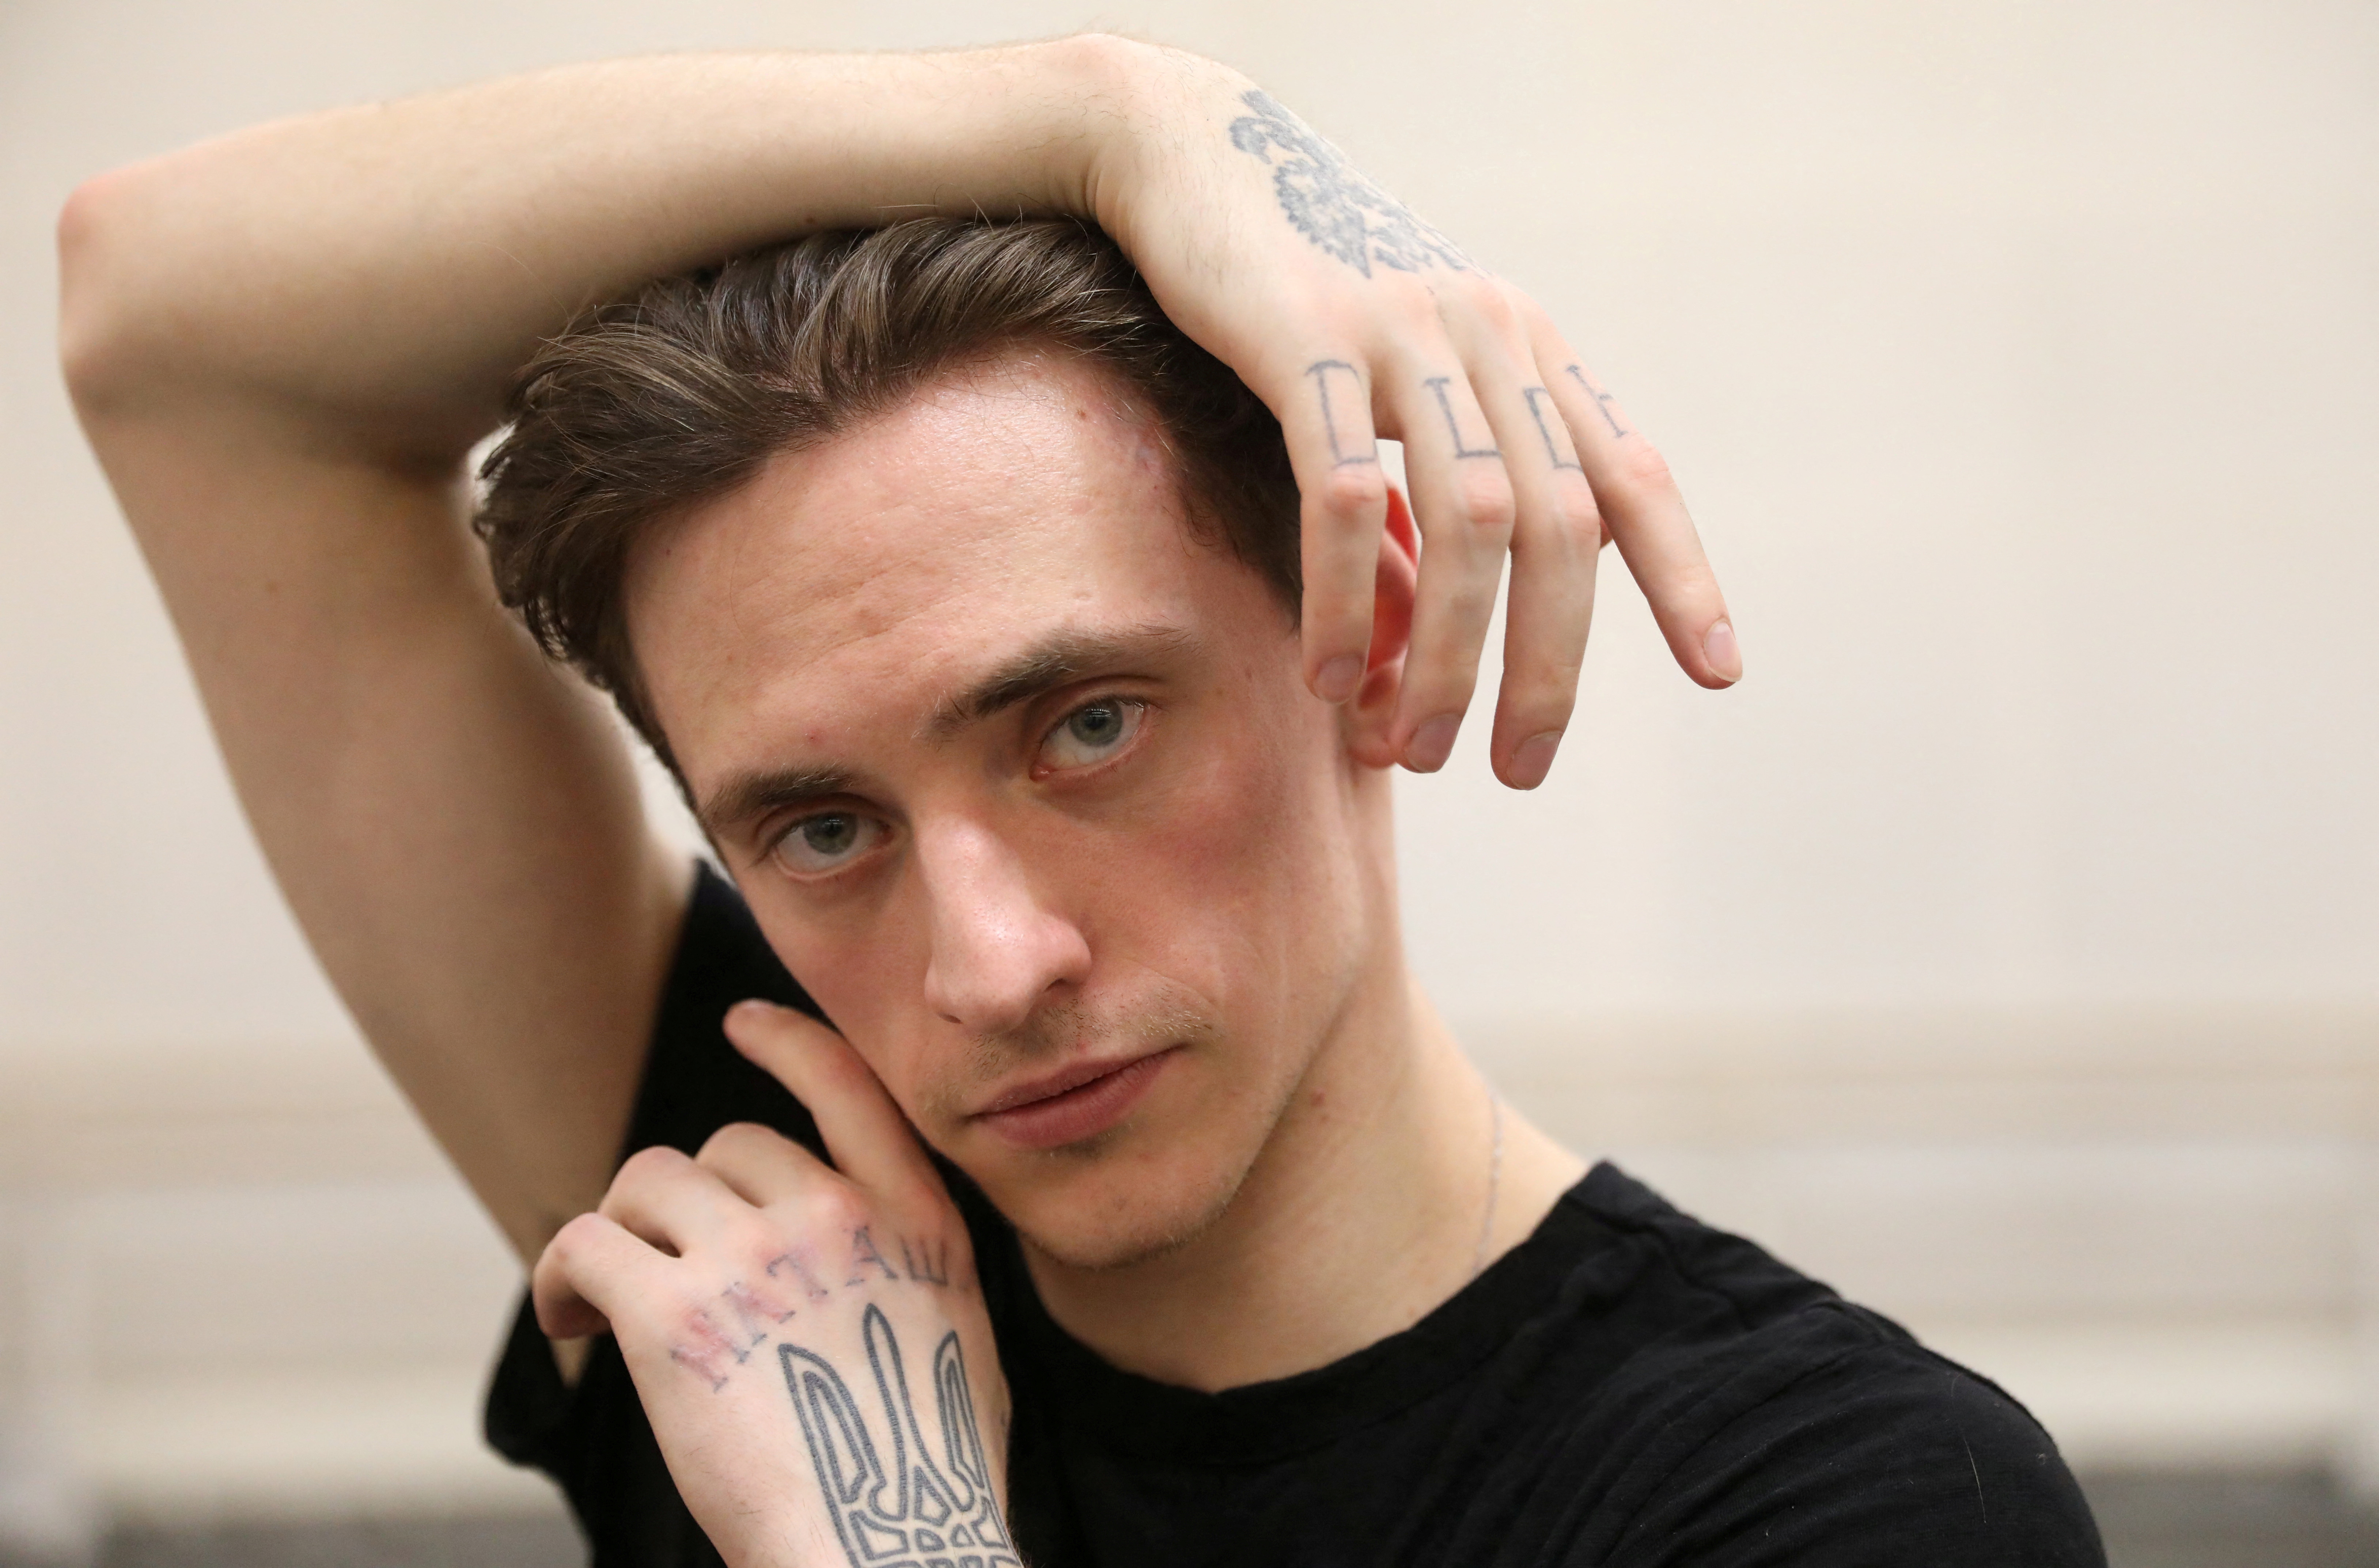 Russian ballet dancer Sergei Polunin poses for a portrait as he rehearses at the Royal Opera House for the Project Polunin show in London